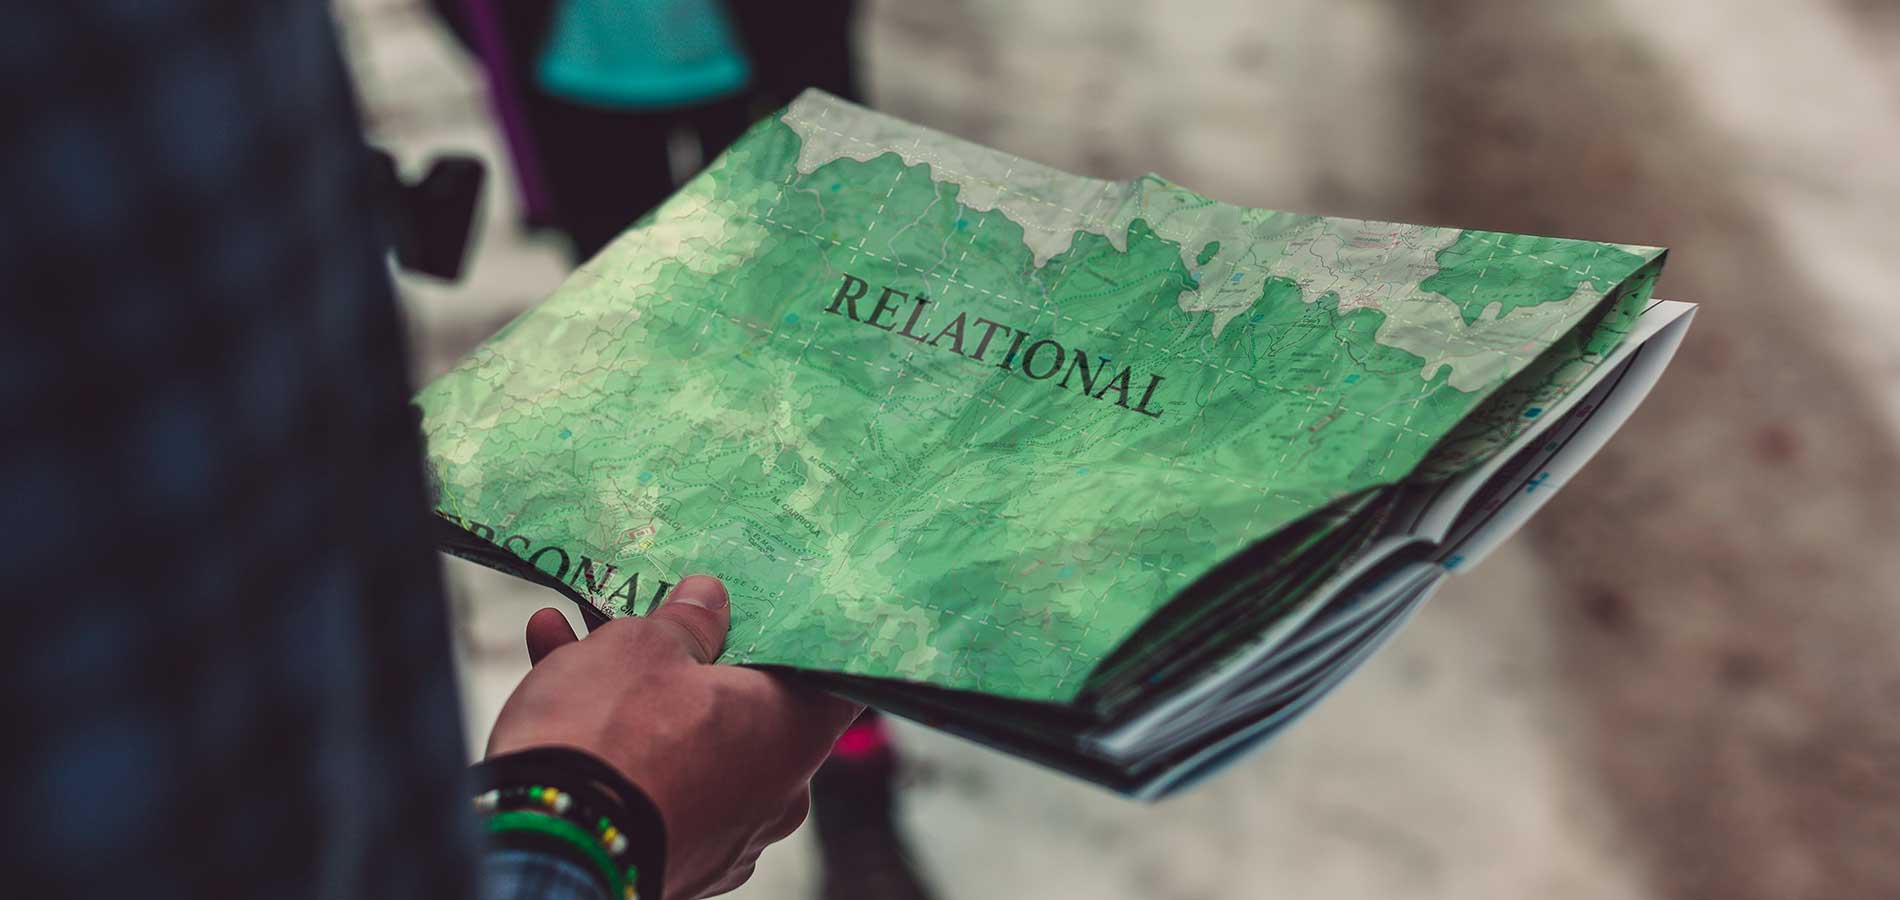 person holding a map of the region labled Personal